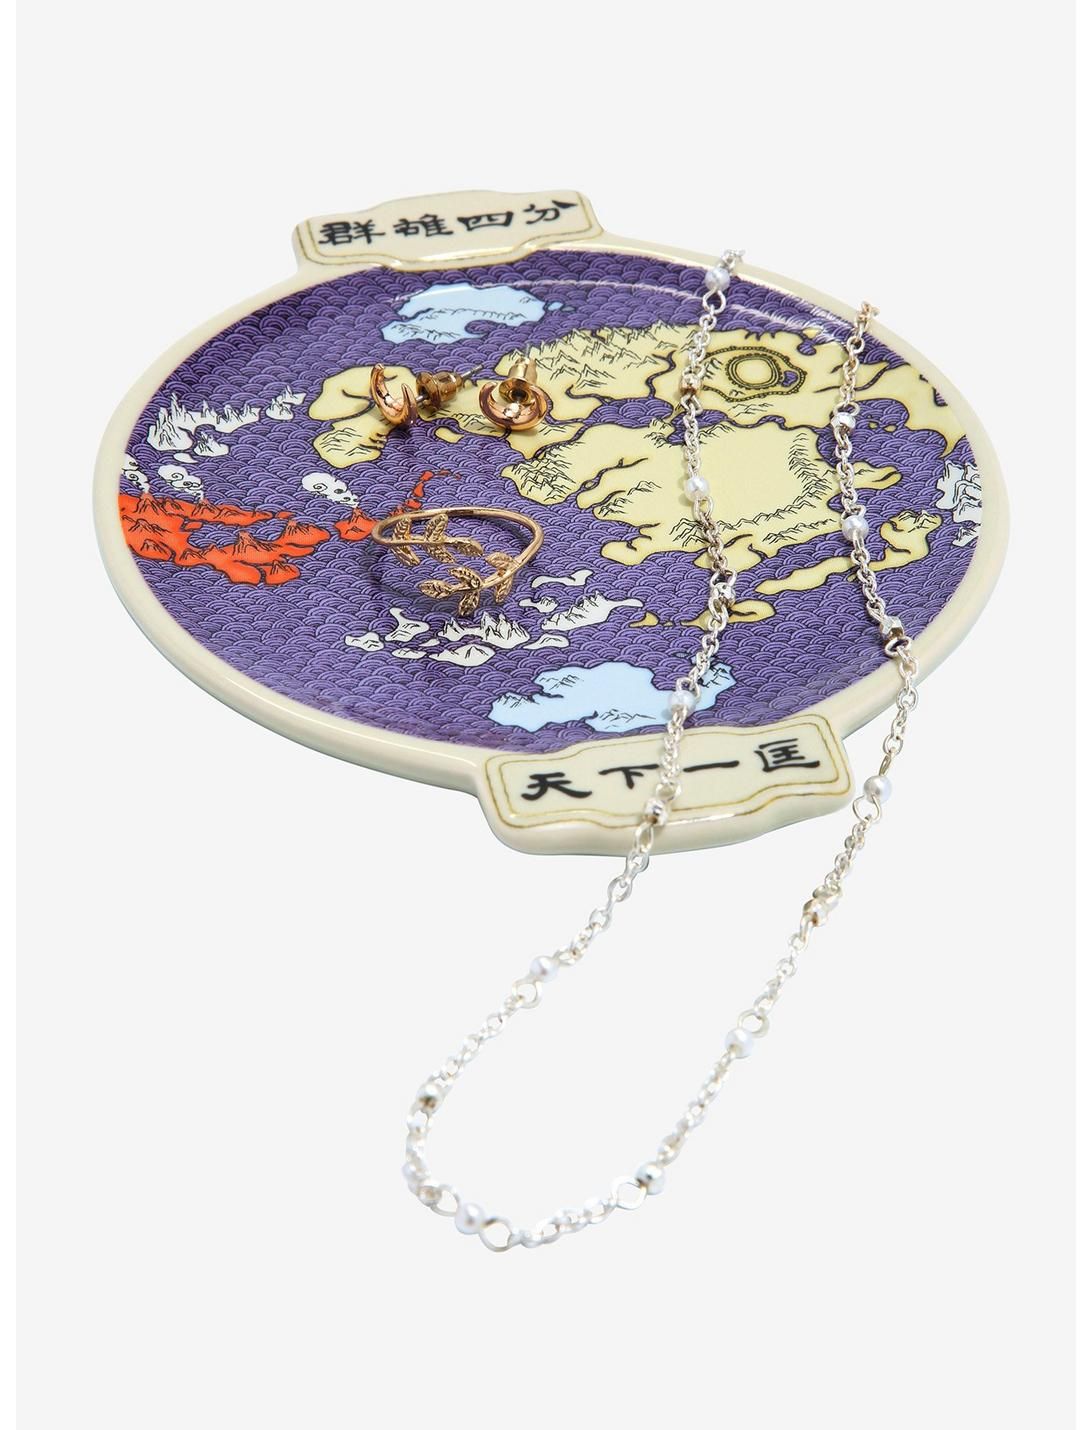 Avatar: The Last Airbender Four Nations Map Trinket Tray | BoxLunch